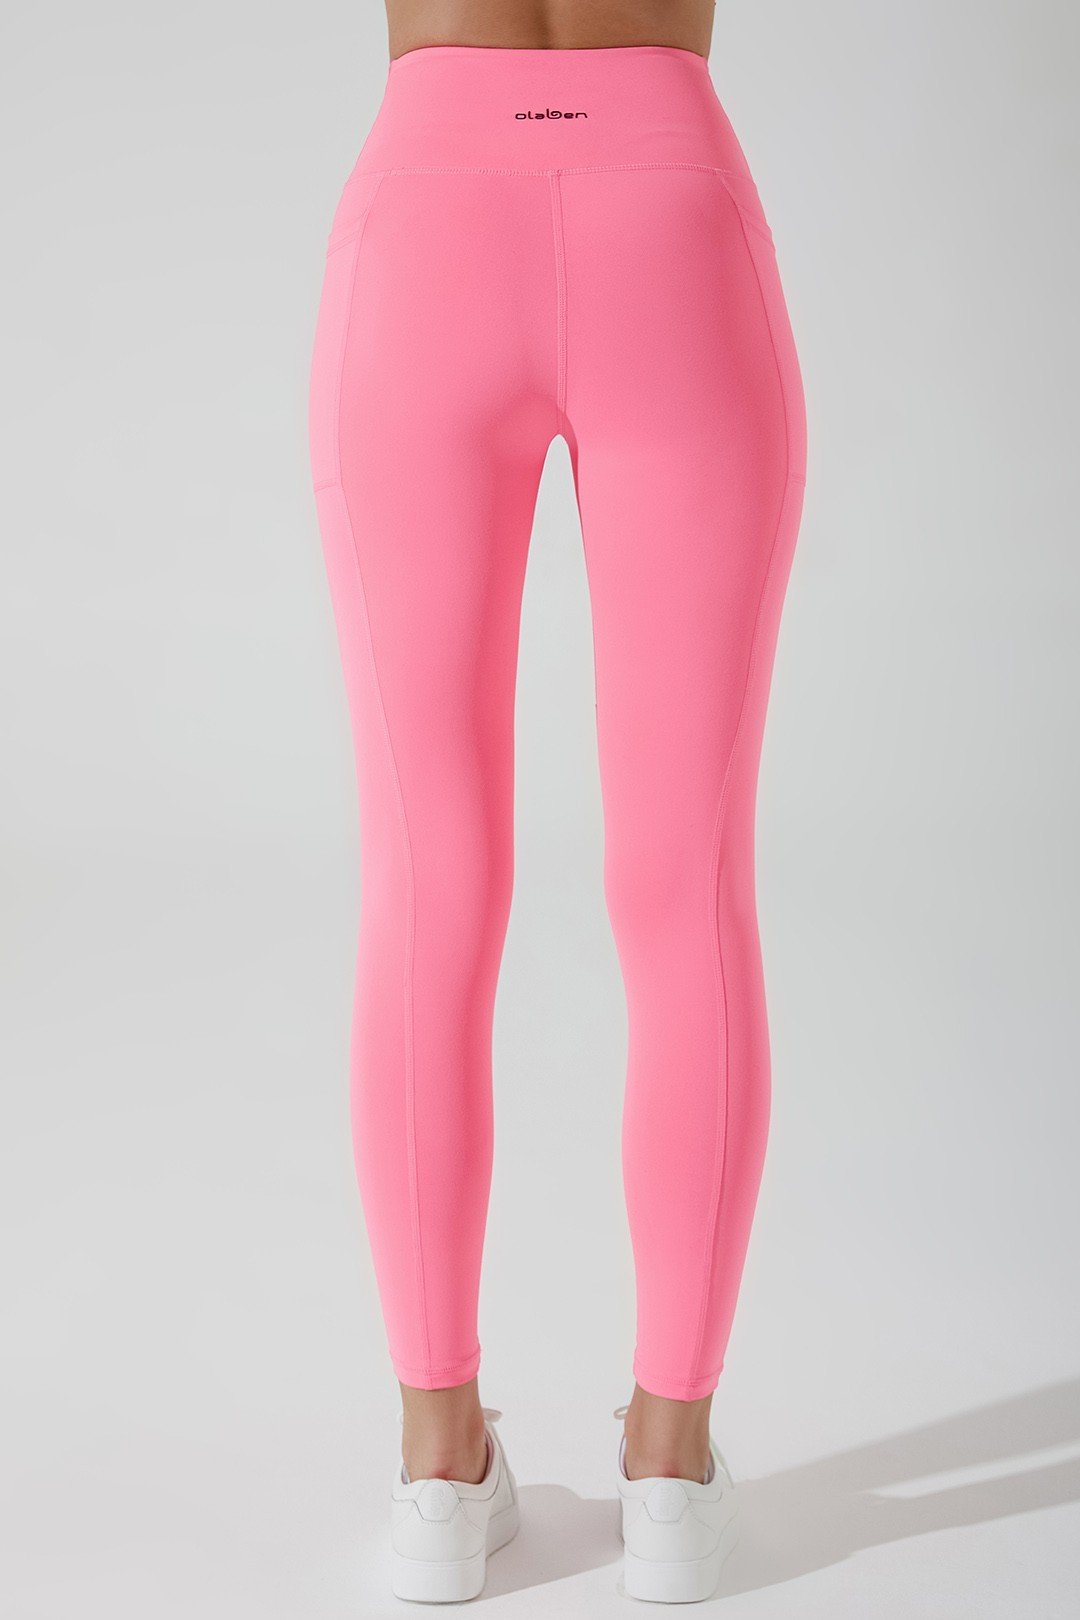 Charlise high-waist leggings in cotton candy pink, perfect for women's fashion - OW-0026-WLG-PK_4.jpg.